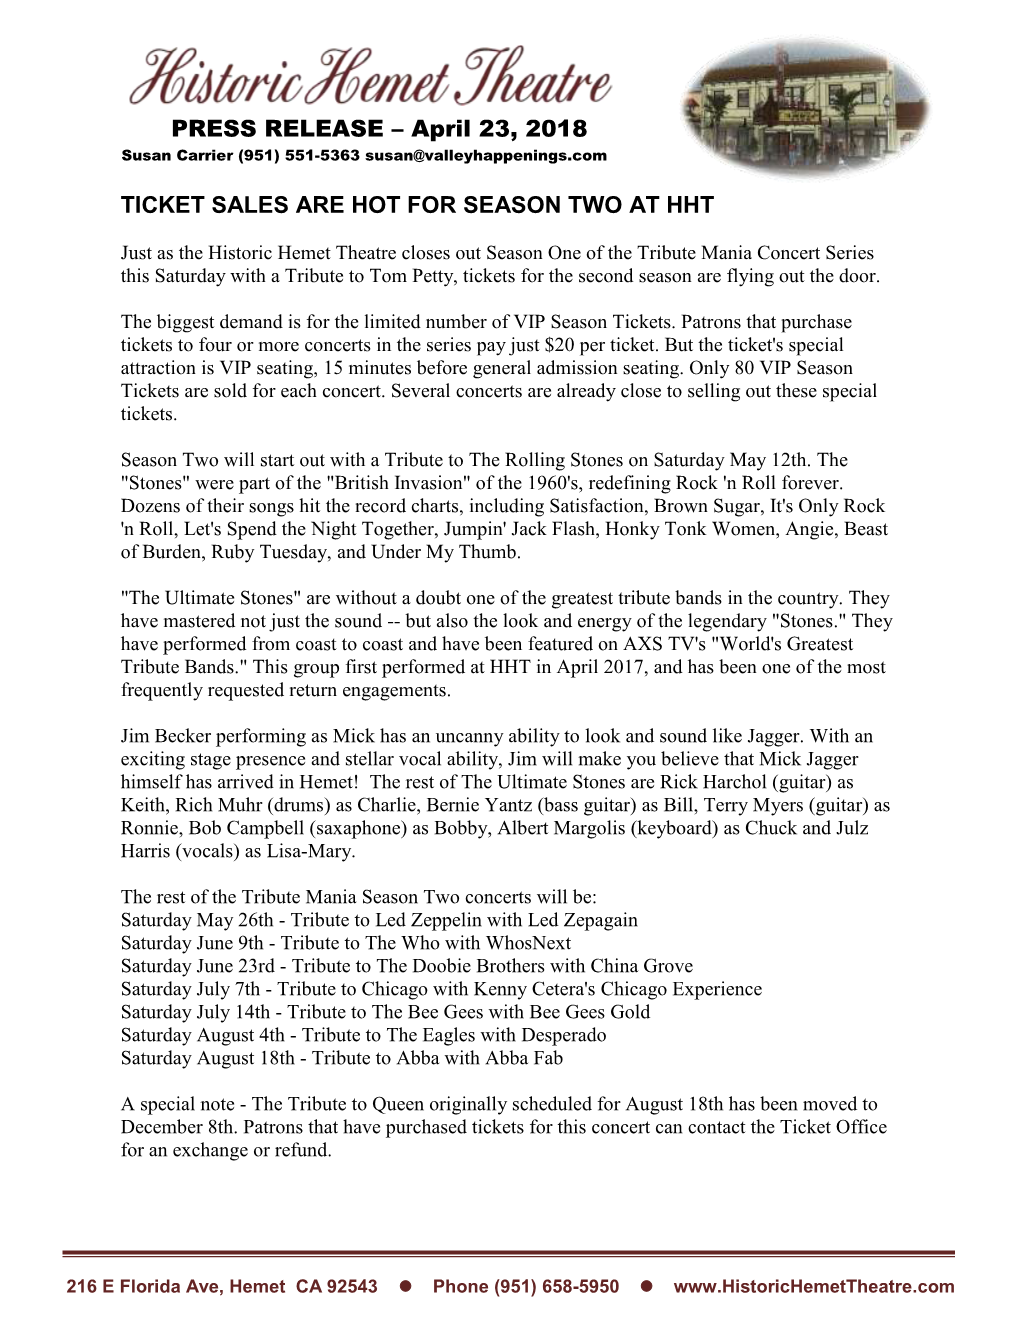 Ticket Sales Are Hot for Season Two at Hht